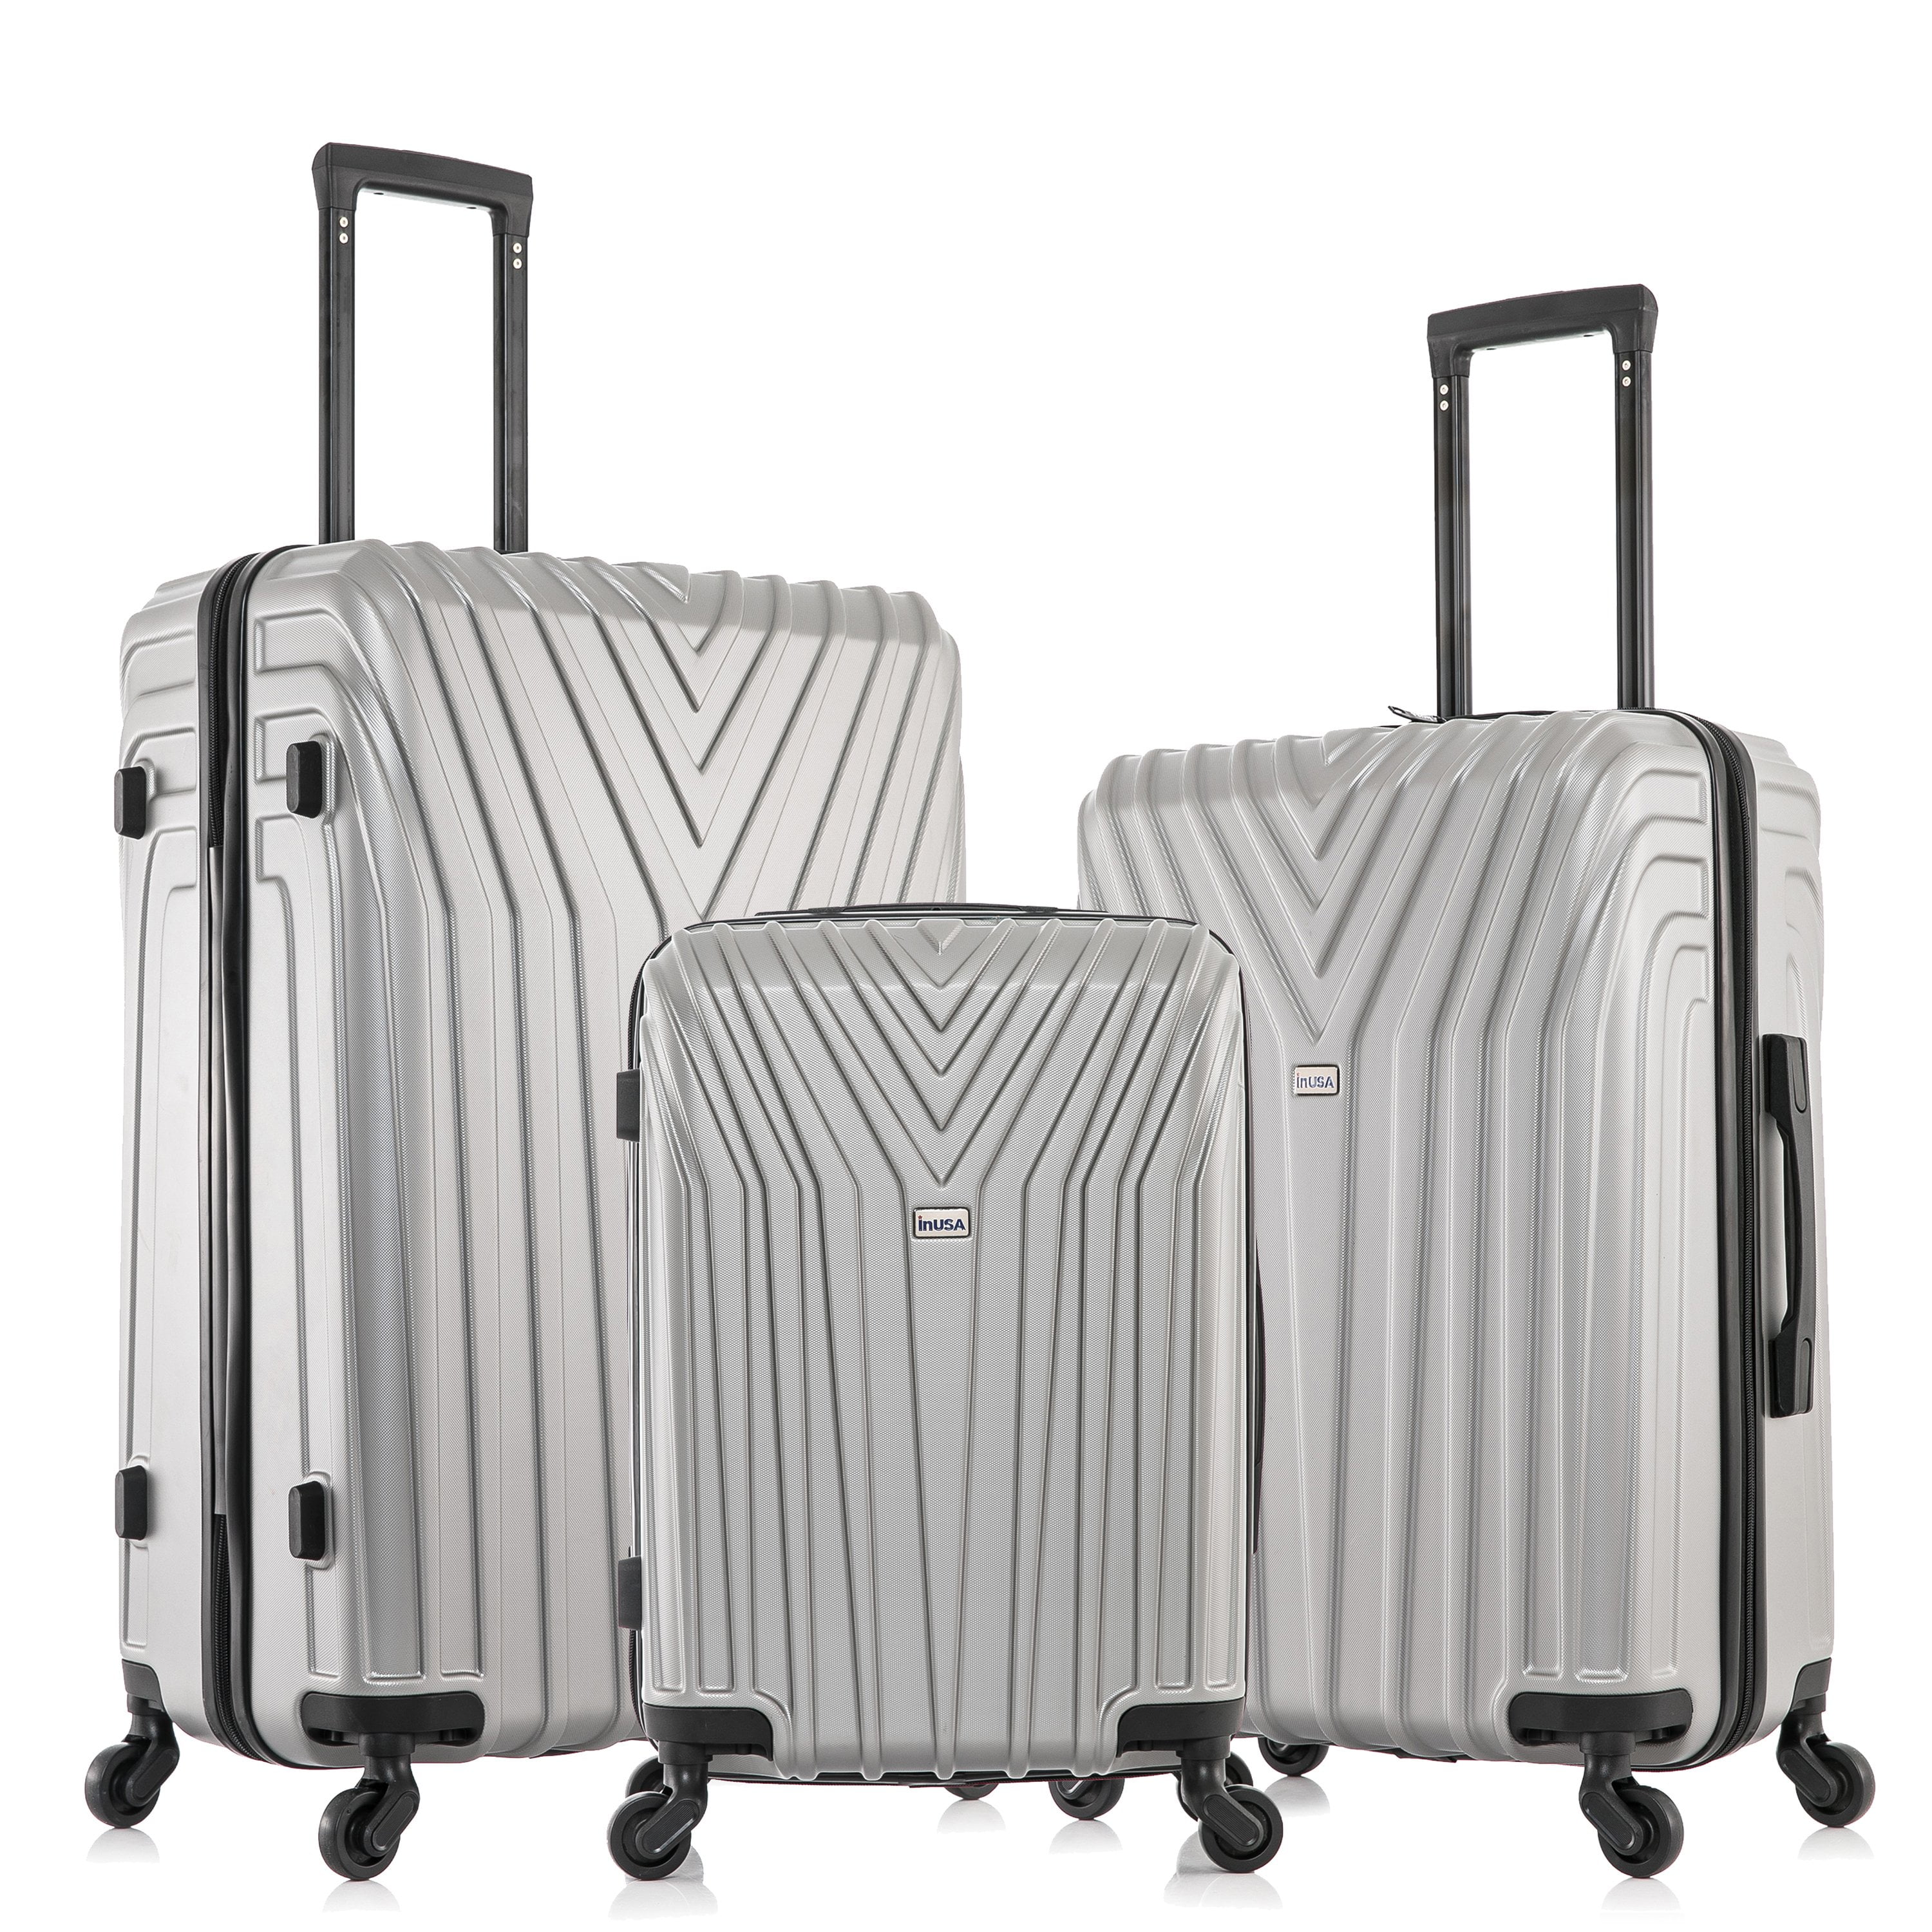 Luggage Suitcase 3-Piece Sets Hardside Carry-on luggage with Spinner Wheels  20 in./24 in./28 in. GR-211-SG - The Home Depot